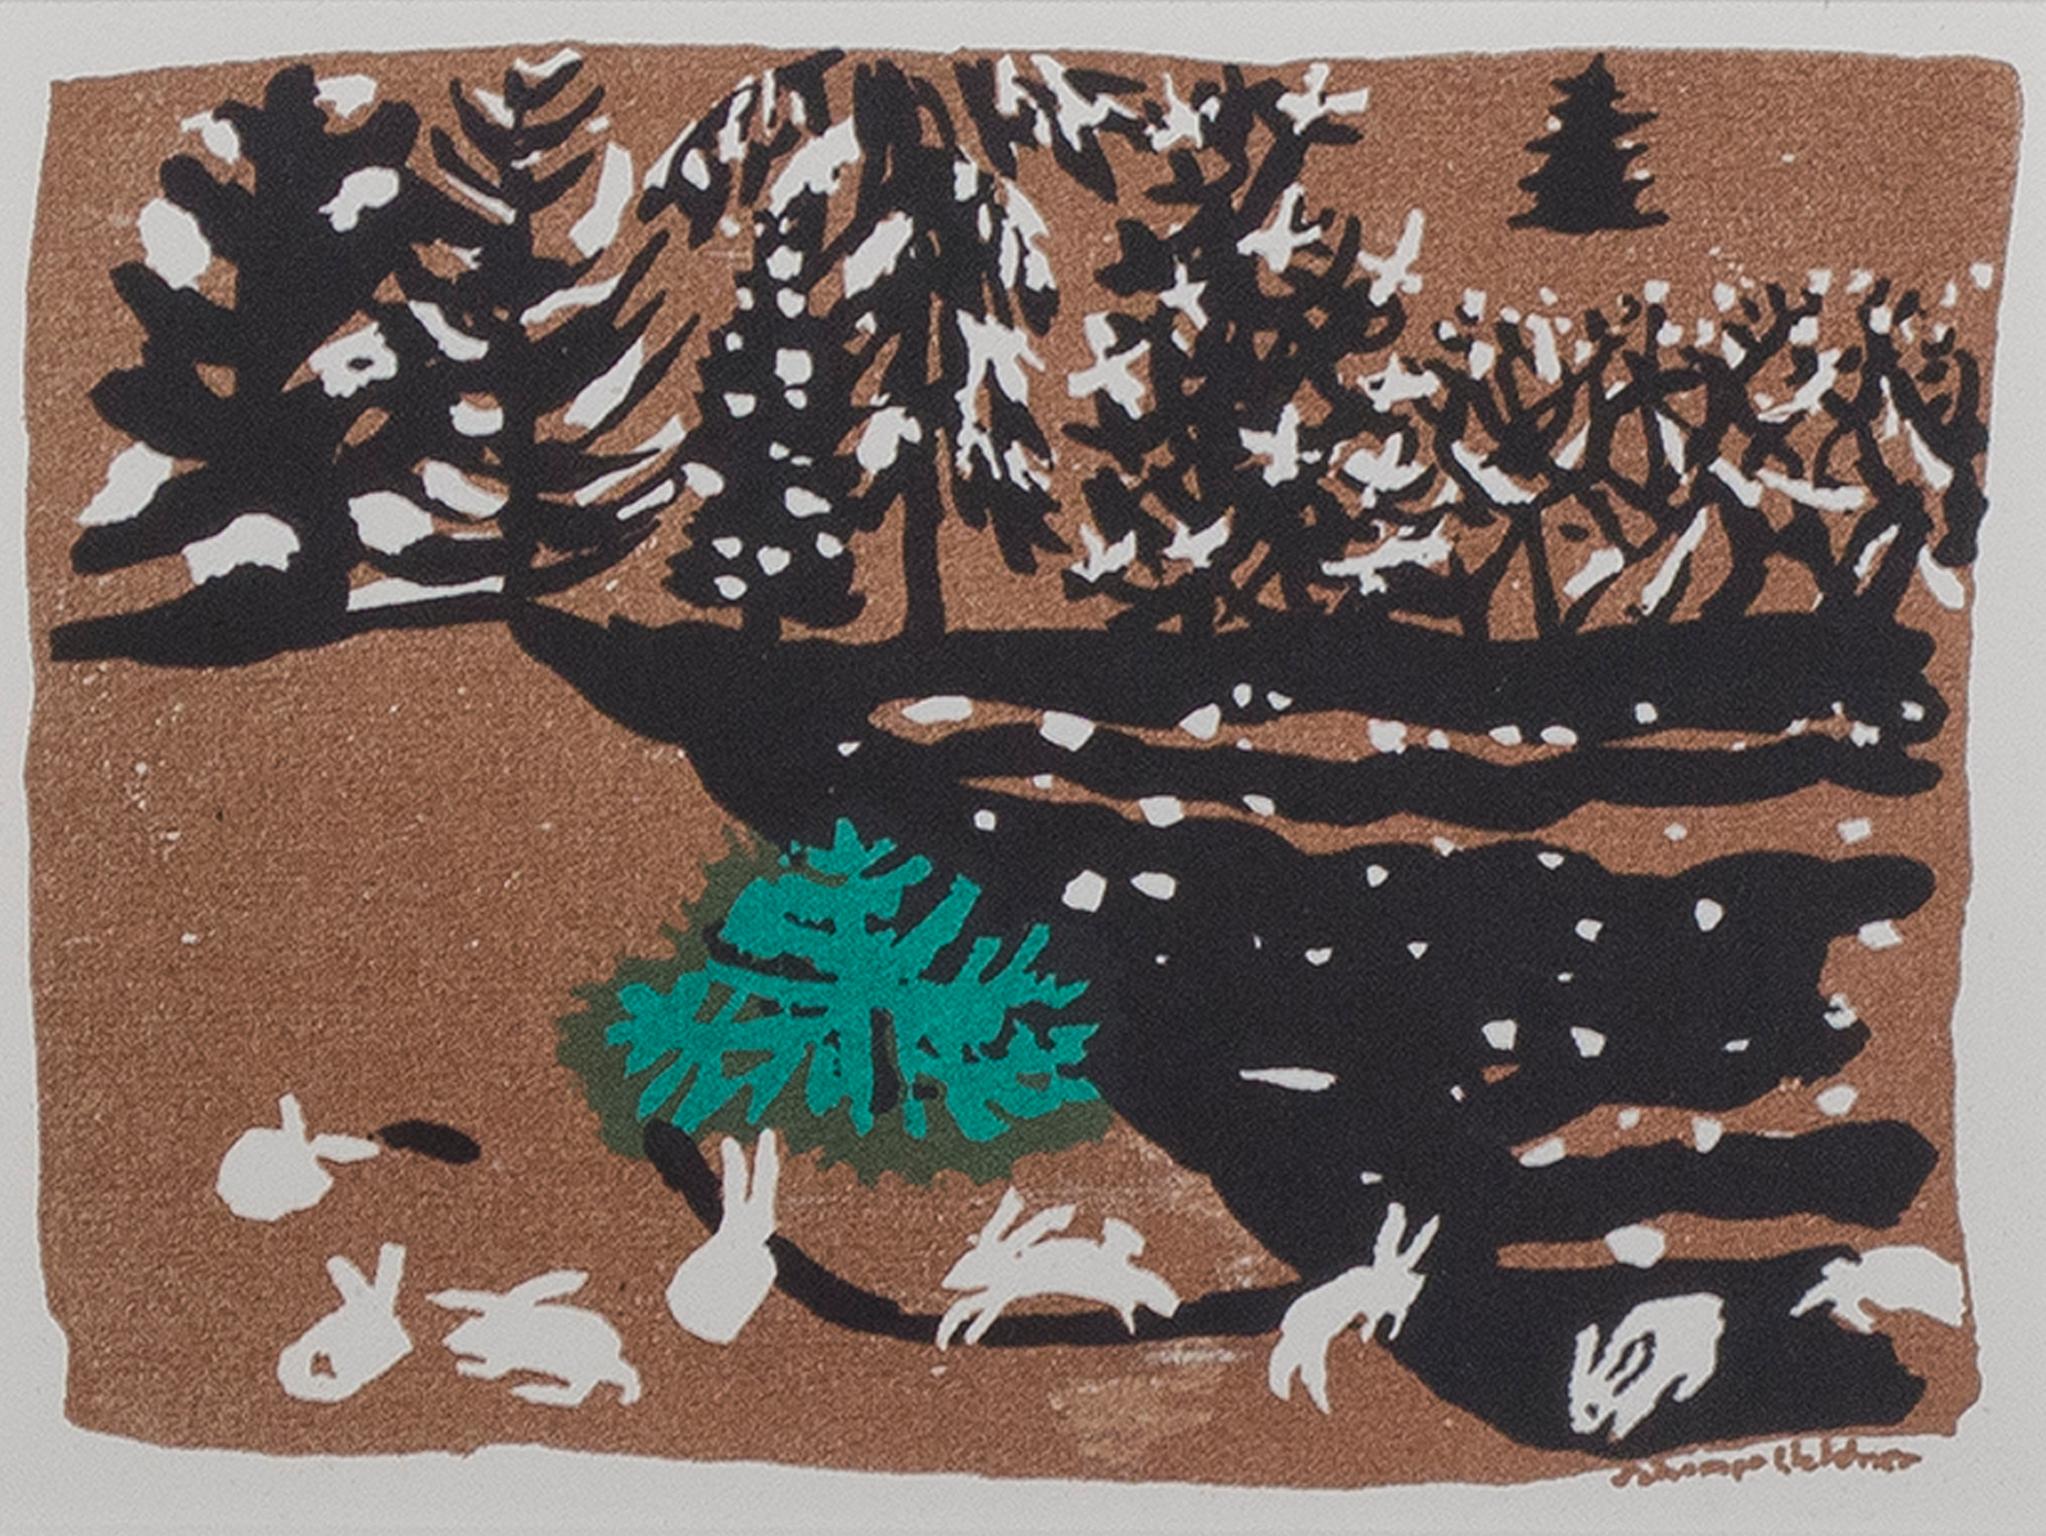 "The Merrymakers" is an original silkscreen print by Schomer Lichtner. The artist's signature is in the lower right. This artwork features white rabbits frolicking in a winter landscape. The artist used brown, green, and black to create this work.